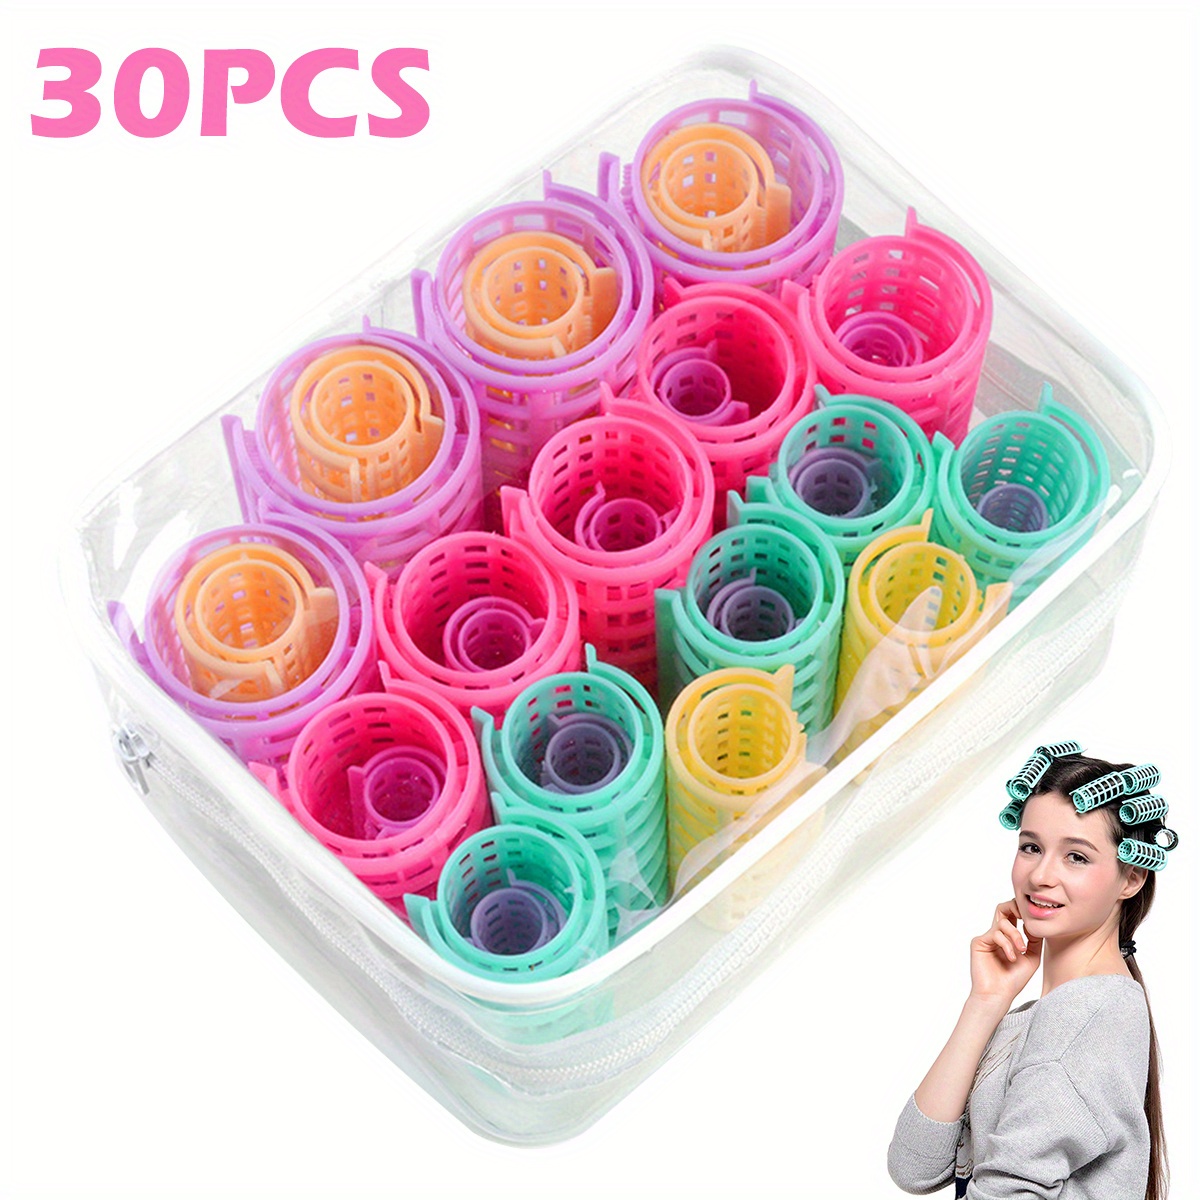 

30pcs/set Hair Roller Sets Self Holding Hairdressing Curlers Diy Curly Hairstyle Tools Lightweight Portable Hair Rollers Reusable Practical Hair Curlers For Women Diy Curling Tools